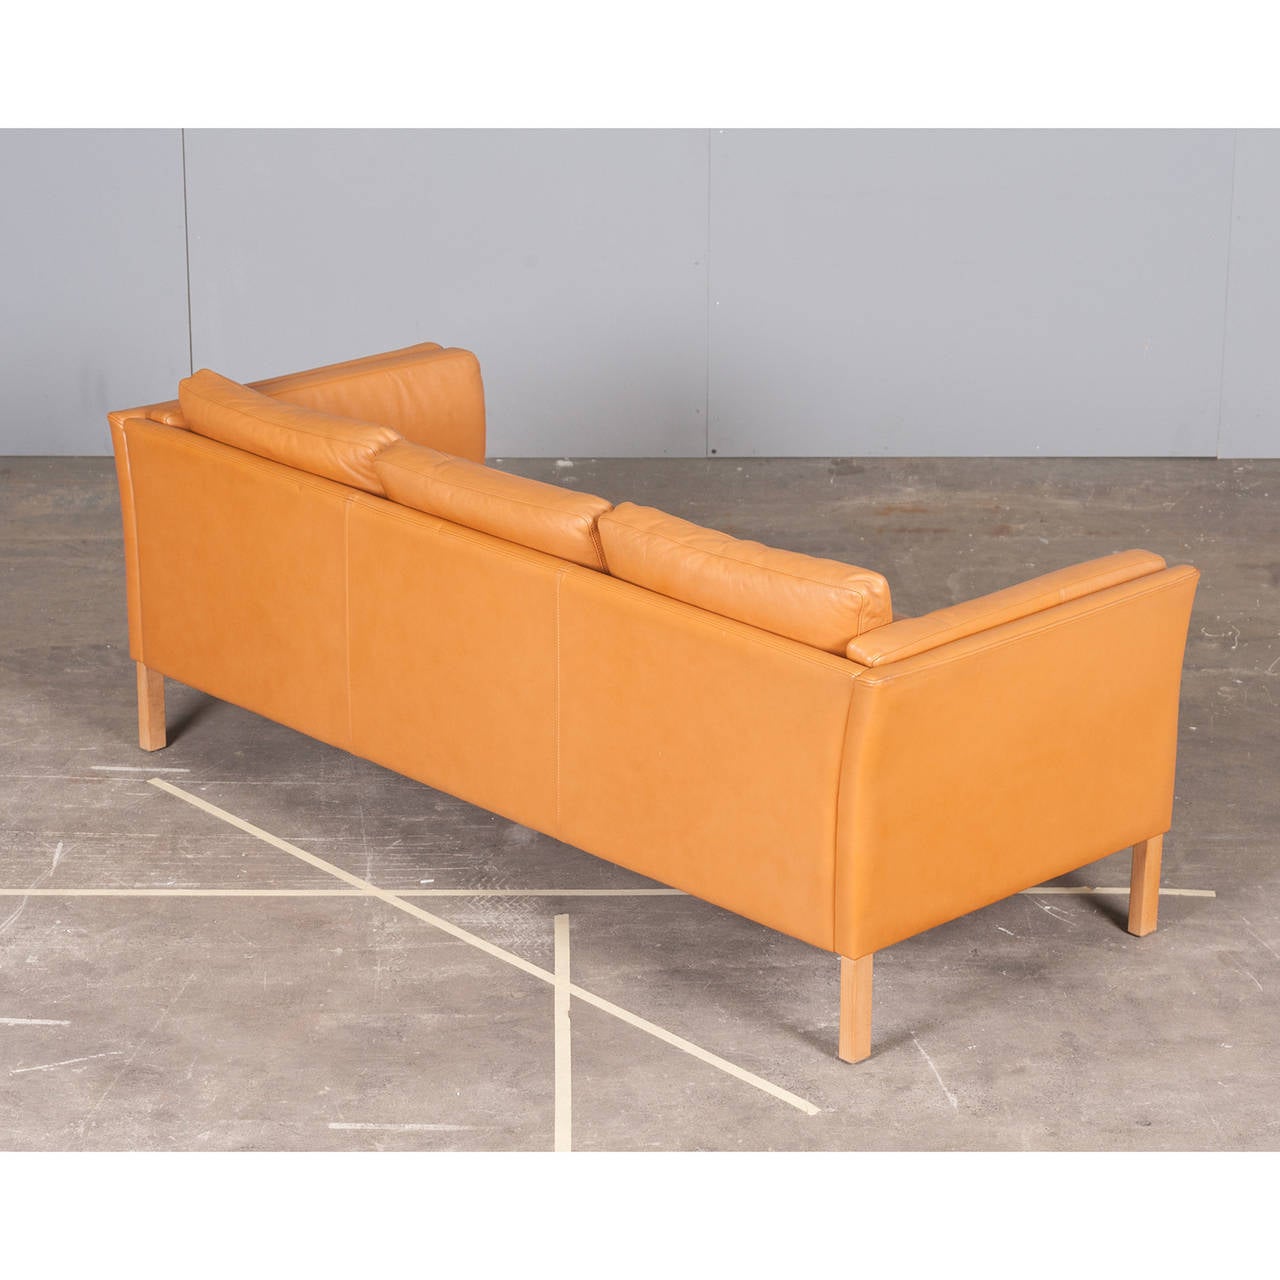 Danish Three-Seater Sofa in Honey Tan Leather, 1960s For Sale 1